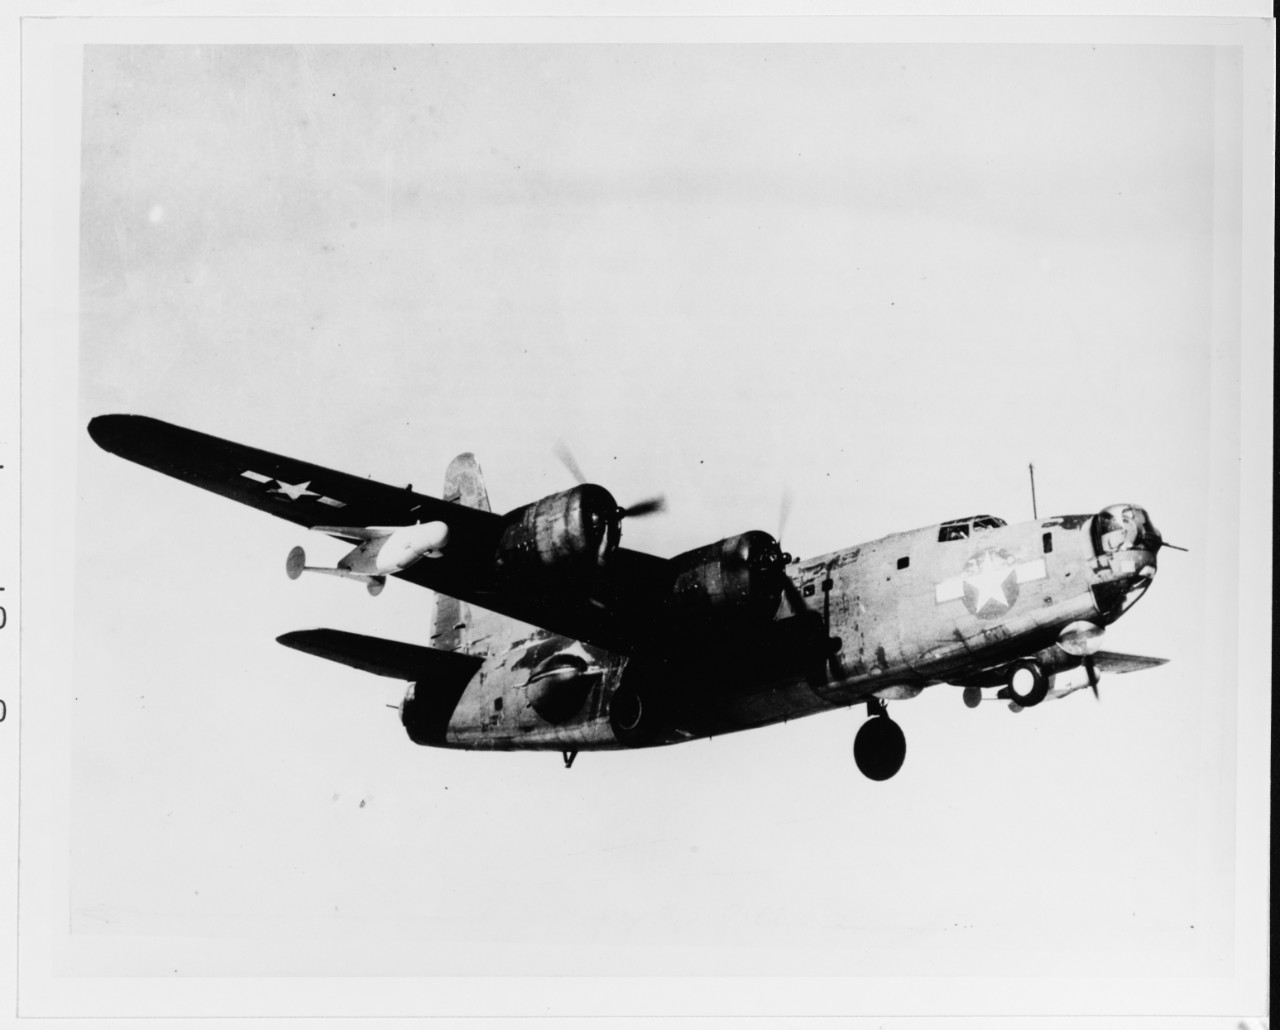 Consolidated PB4Y-2B "Privateer"